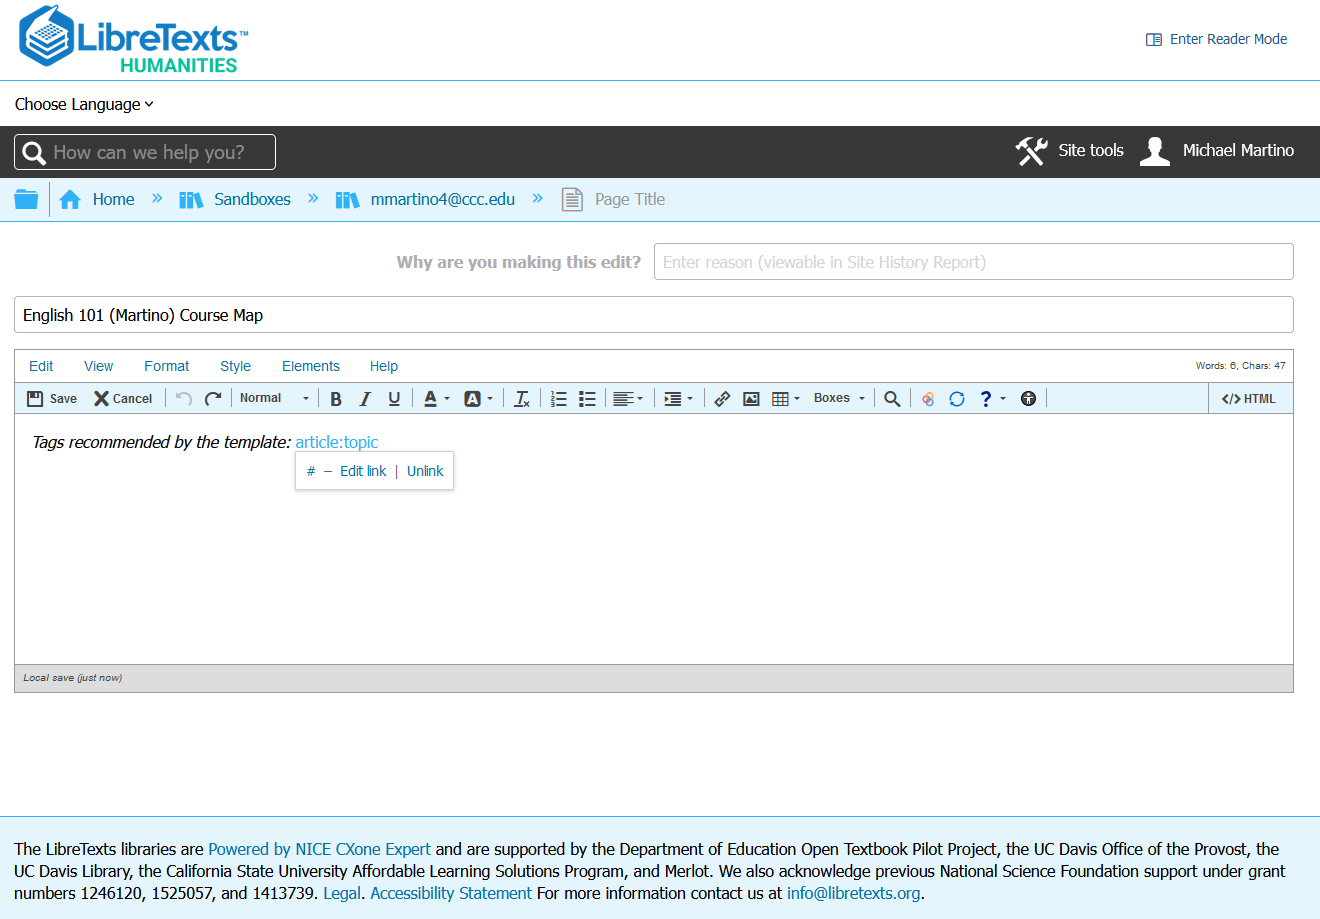 Screenshot showing a newly created page in the Sandbox.